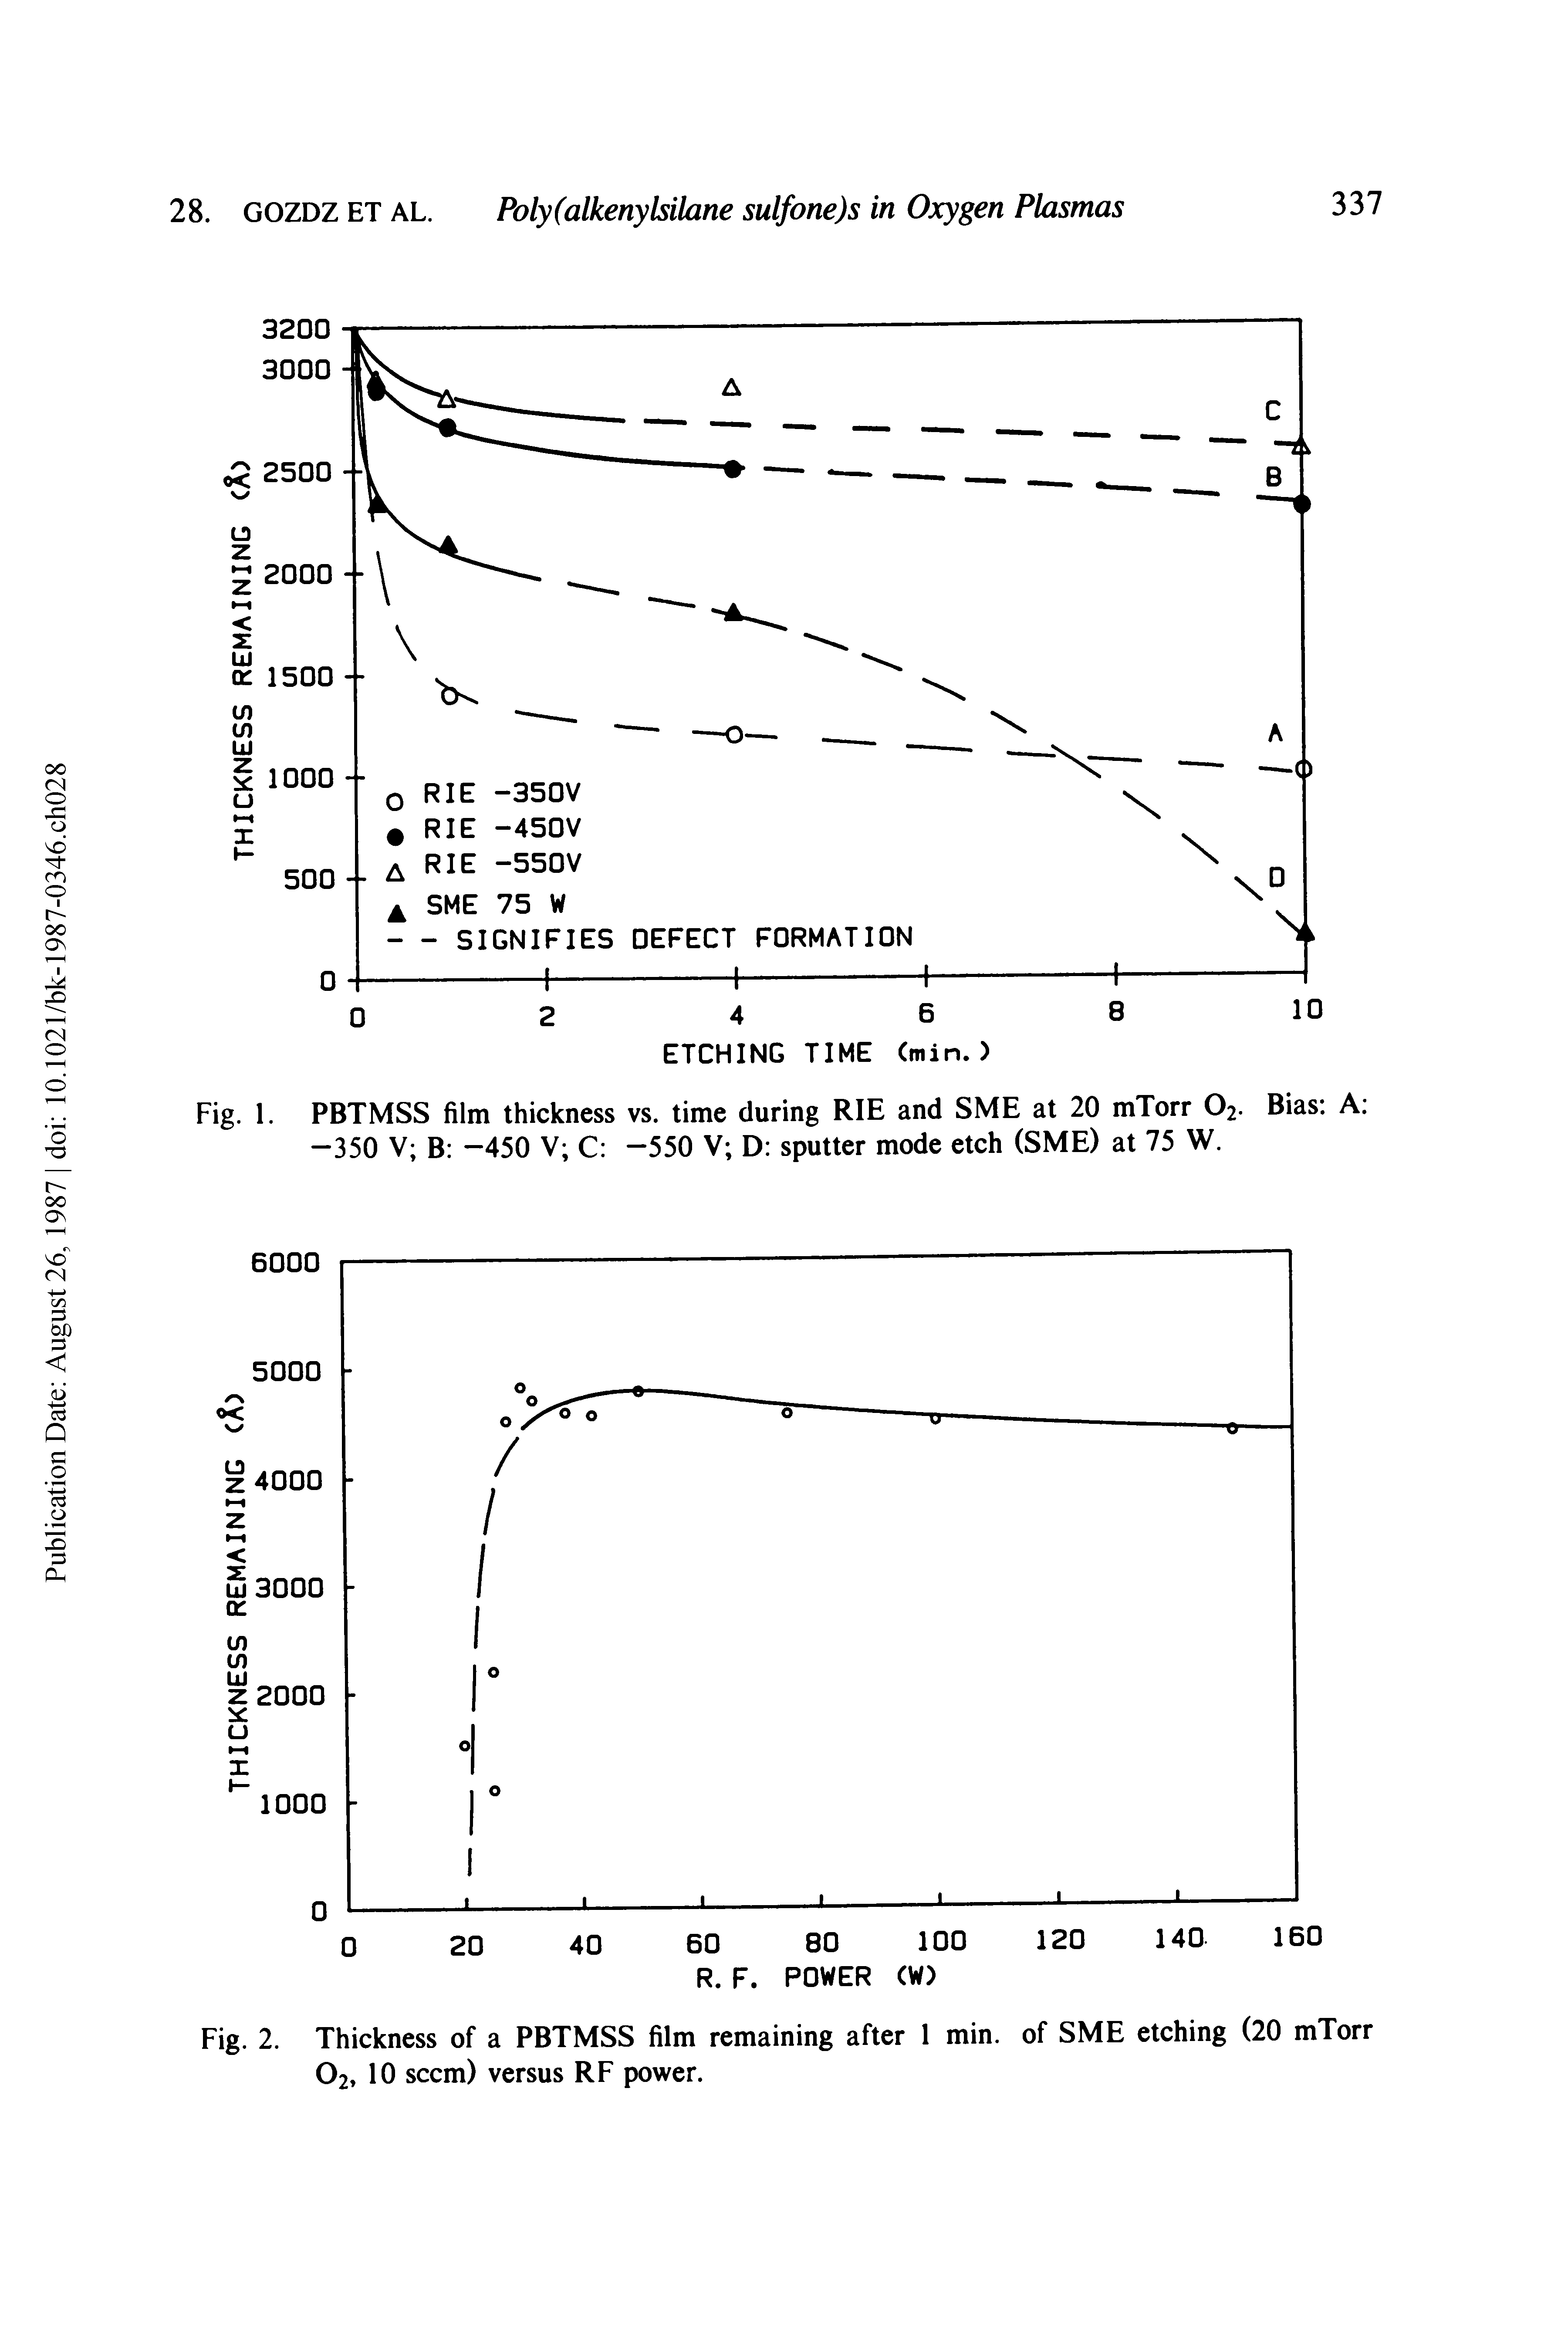 Fig. 1. PBTMSS film thickness vs. time during RIE and SME at 20 mTorr 02- Bias A -350 V B -450 V C -550 V D sputter mode etch (SME) at 75 W.